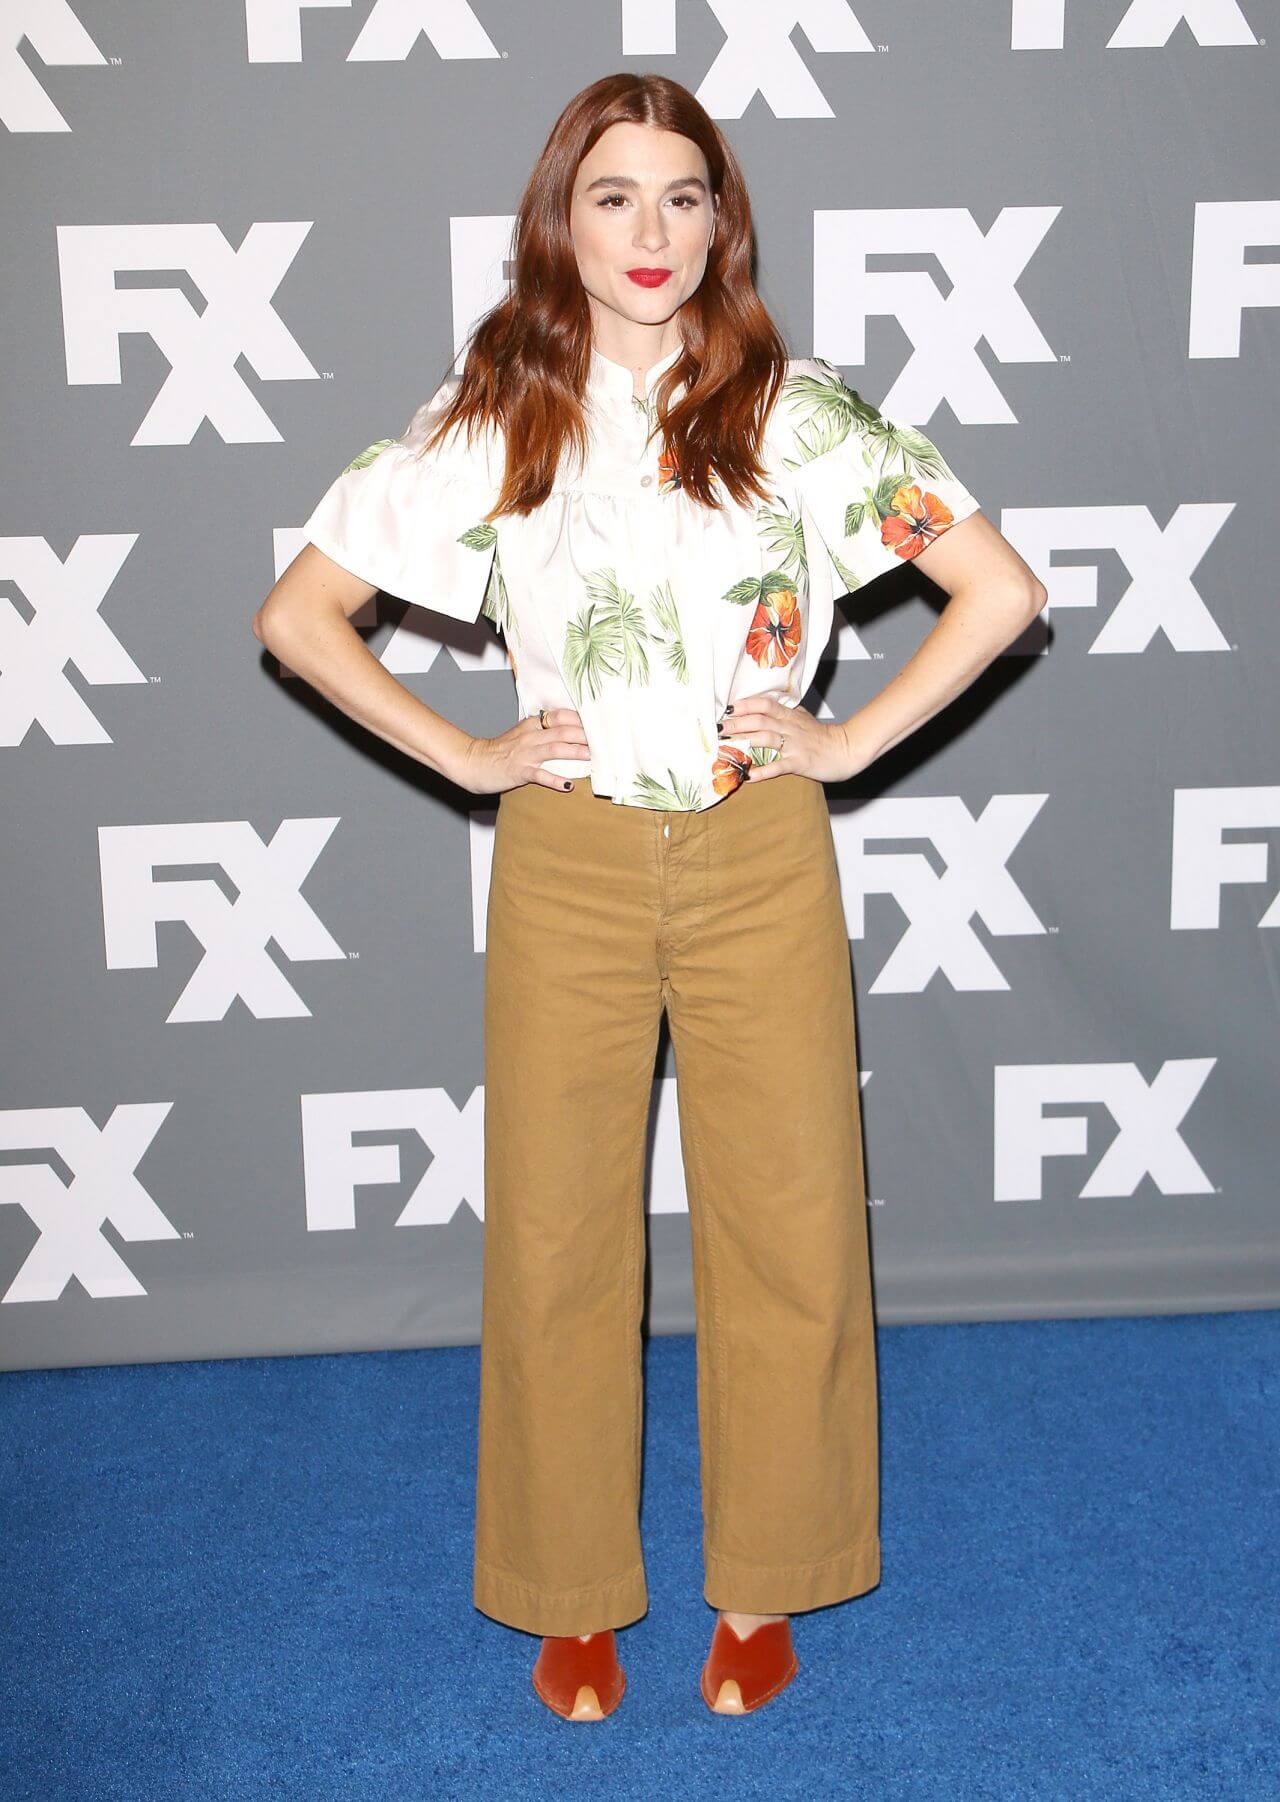 Aya Cash  In White Floral Print Shirt With Brown Pants At FX, TCA Summer Press Tour in LA